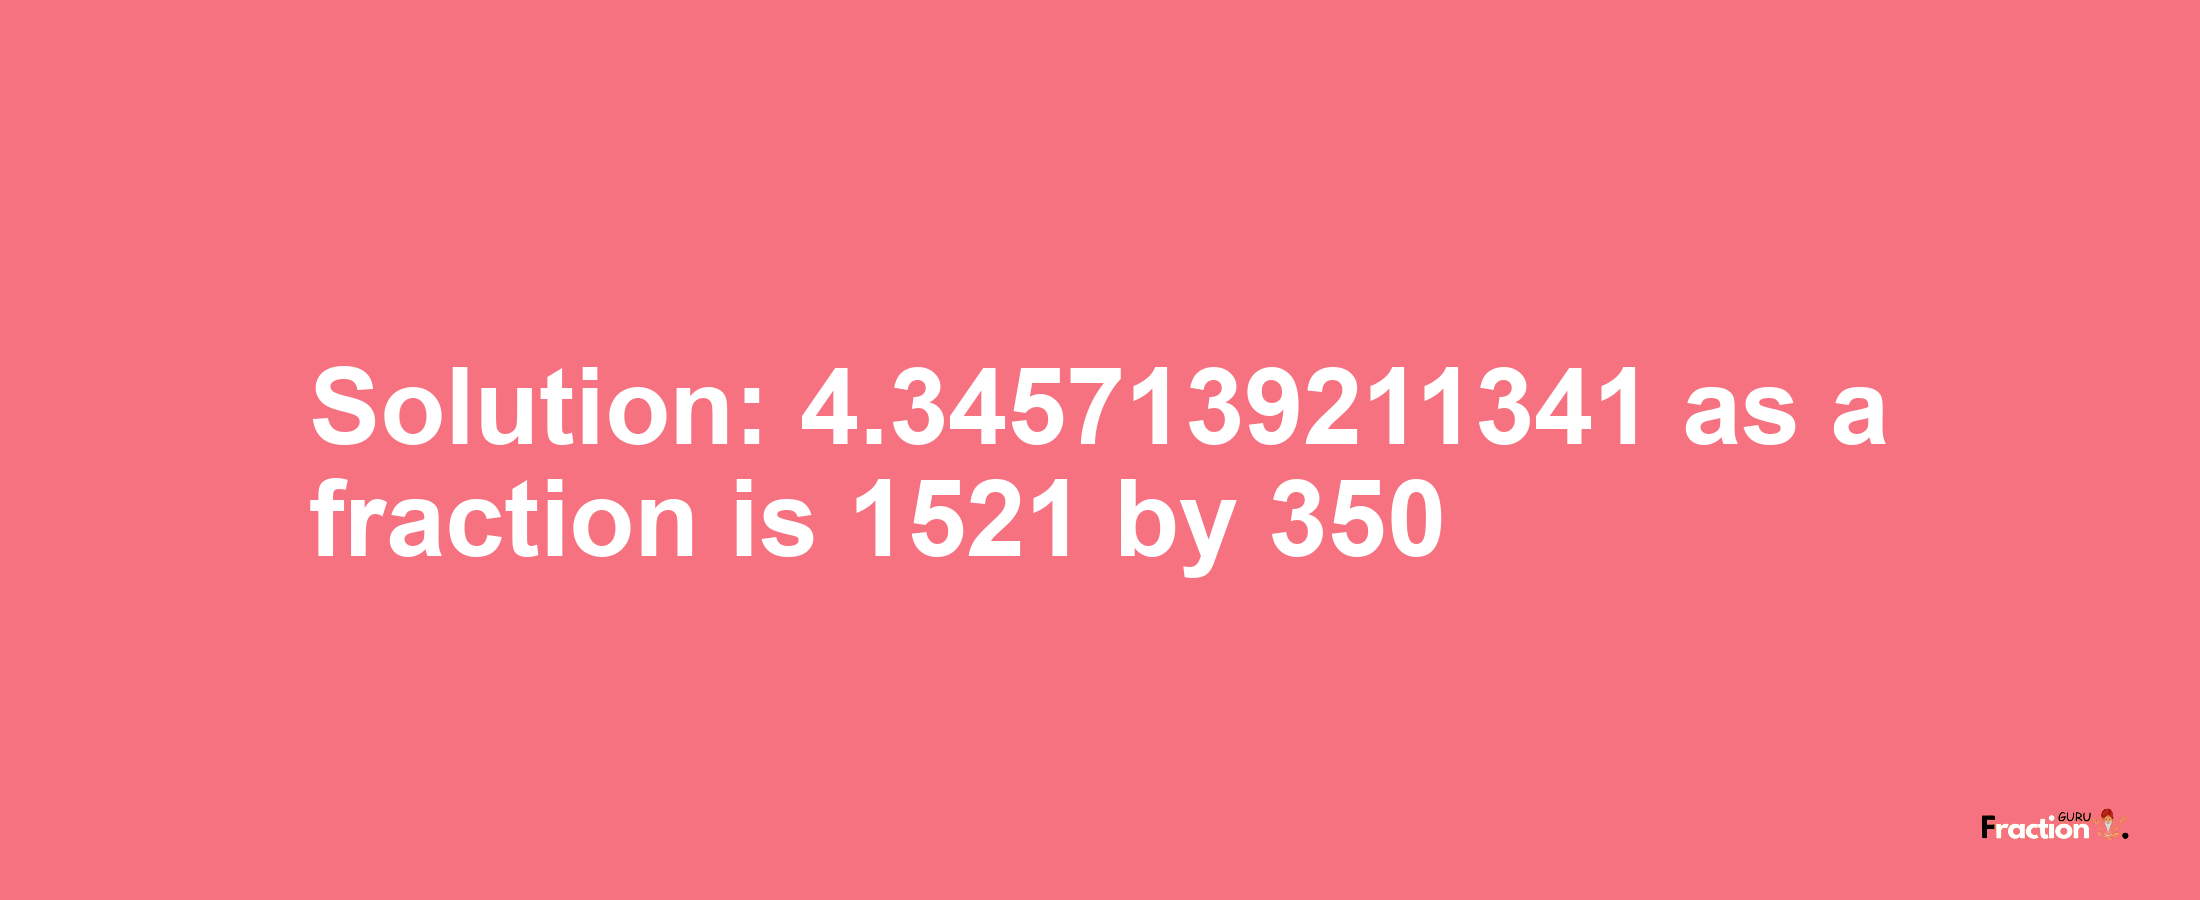 Solution:4.3457139211341 as a fraction is 1521/350